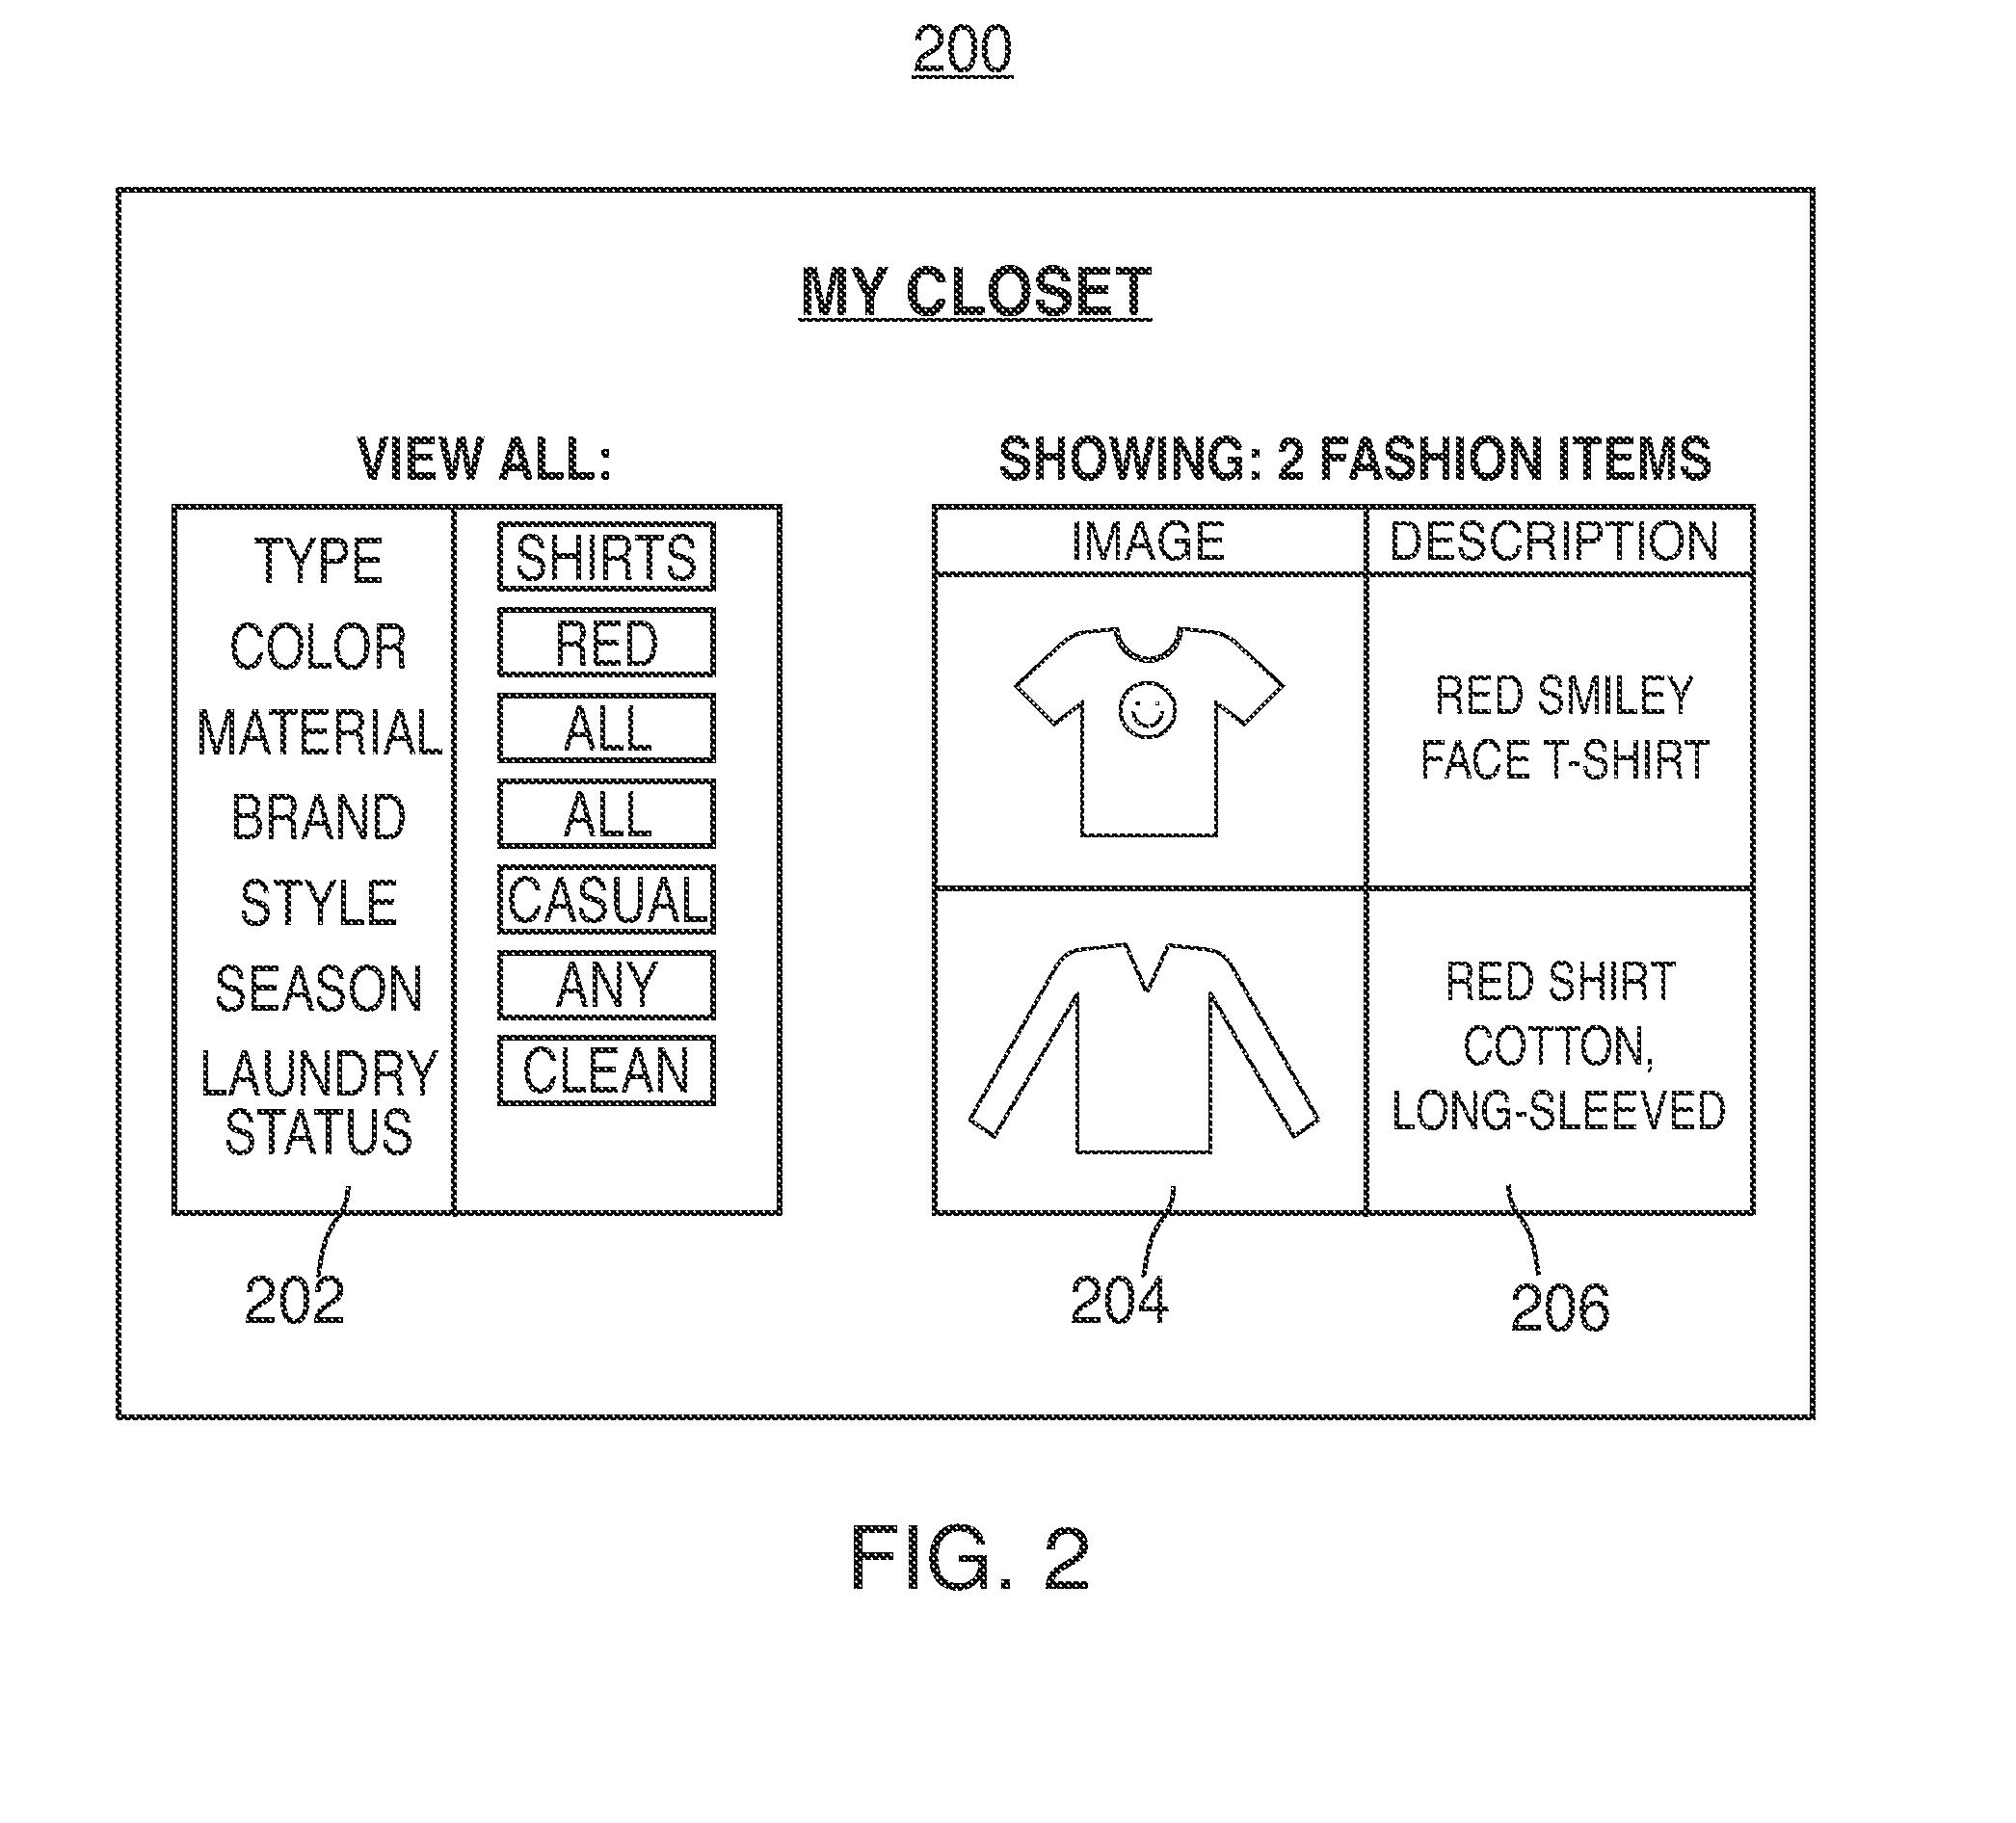 Systems and methods for providing a virtual fashion closet